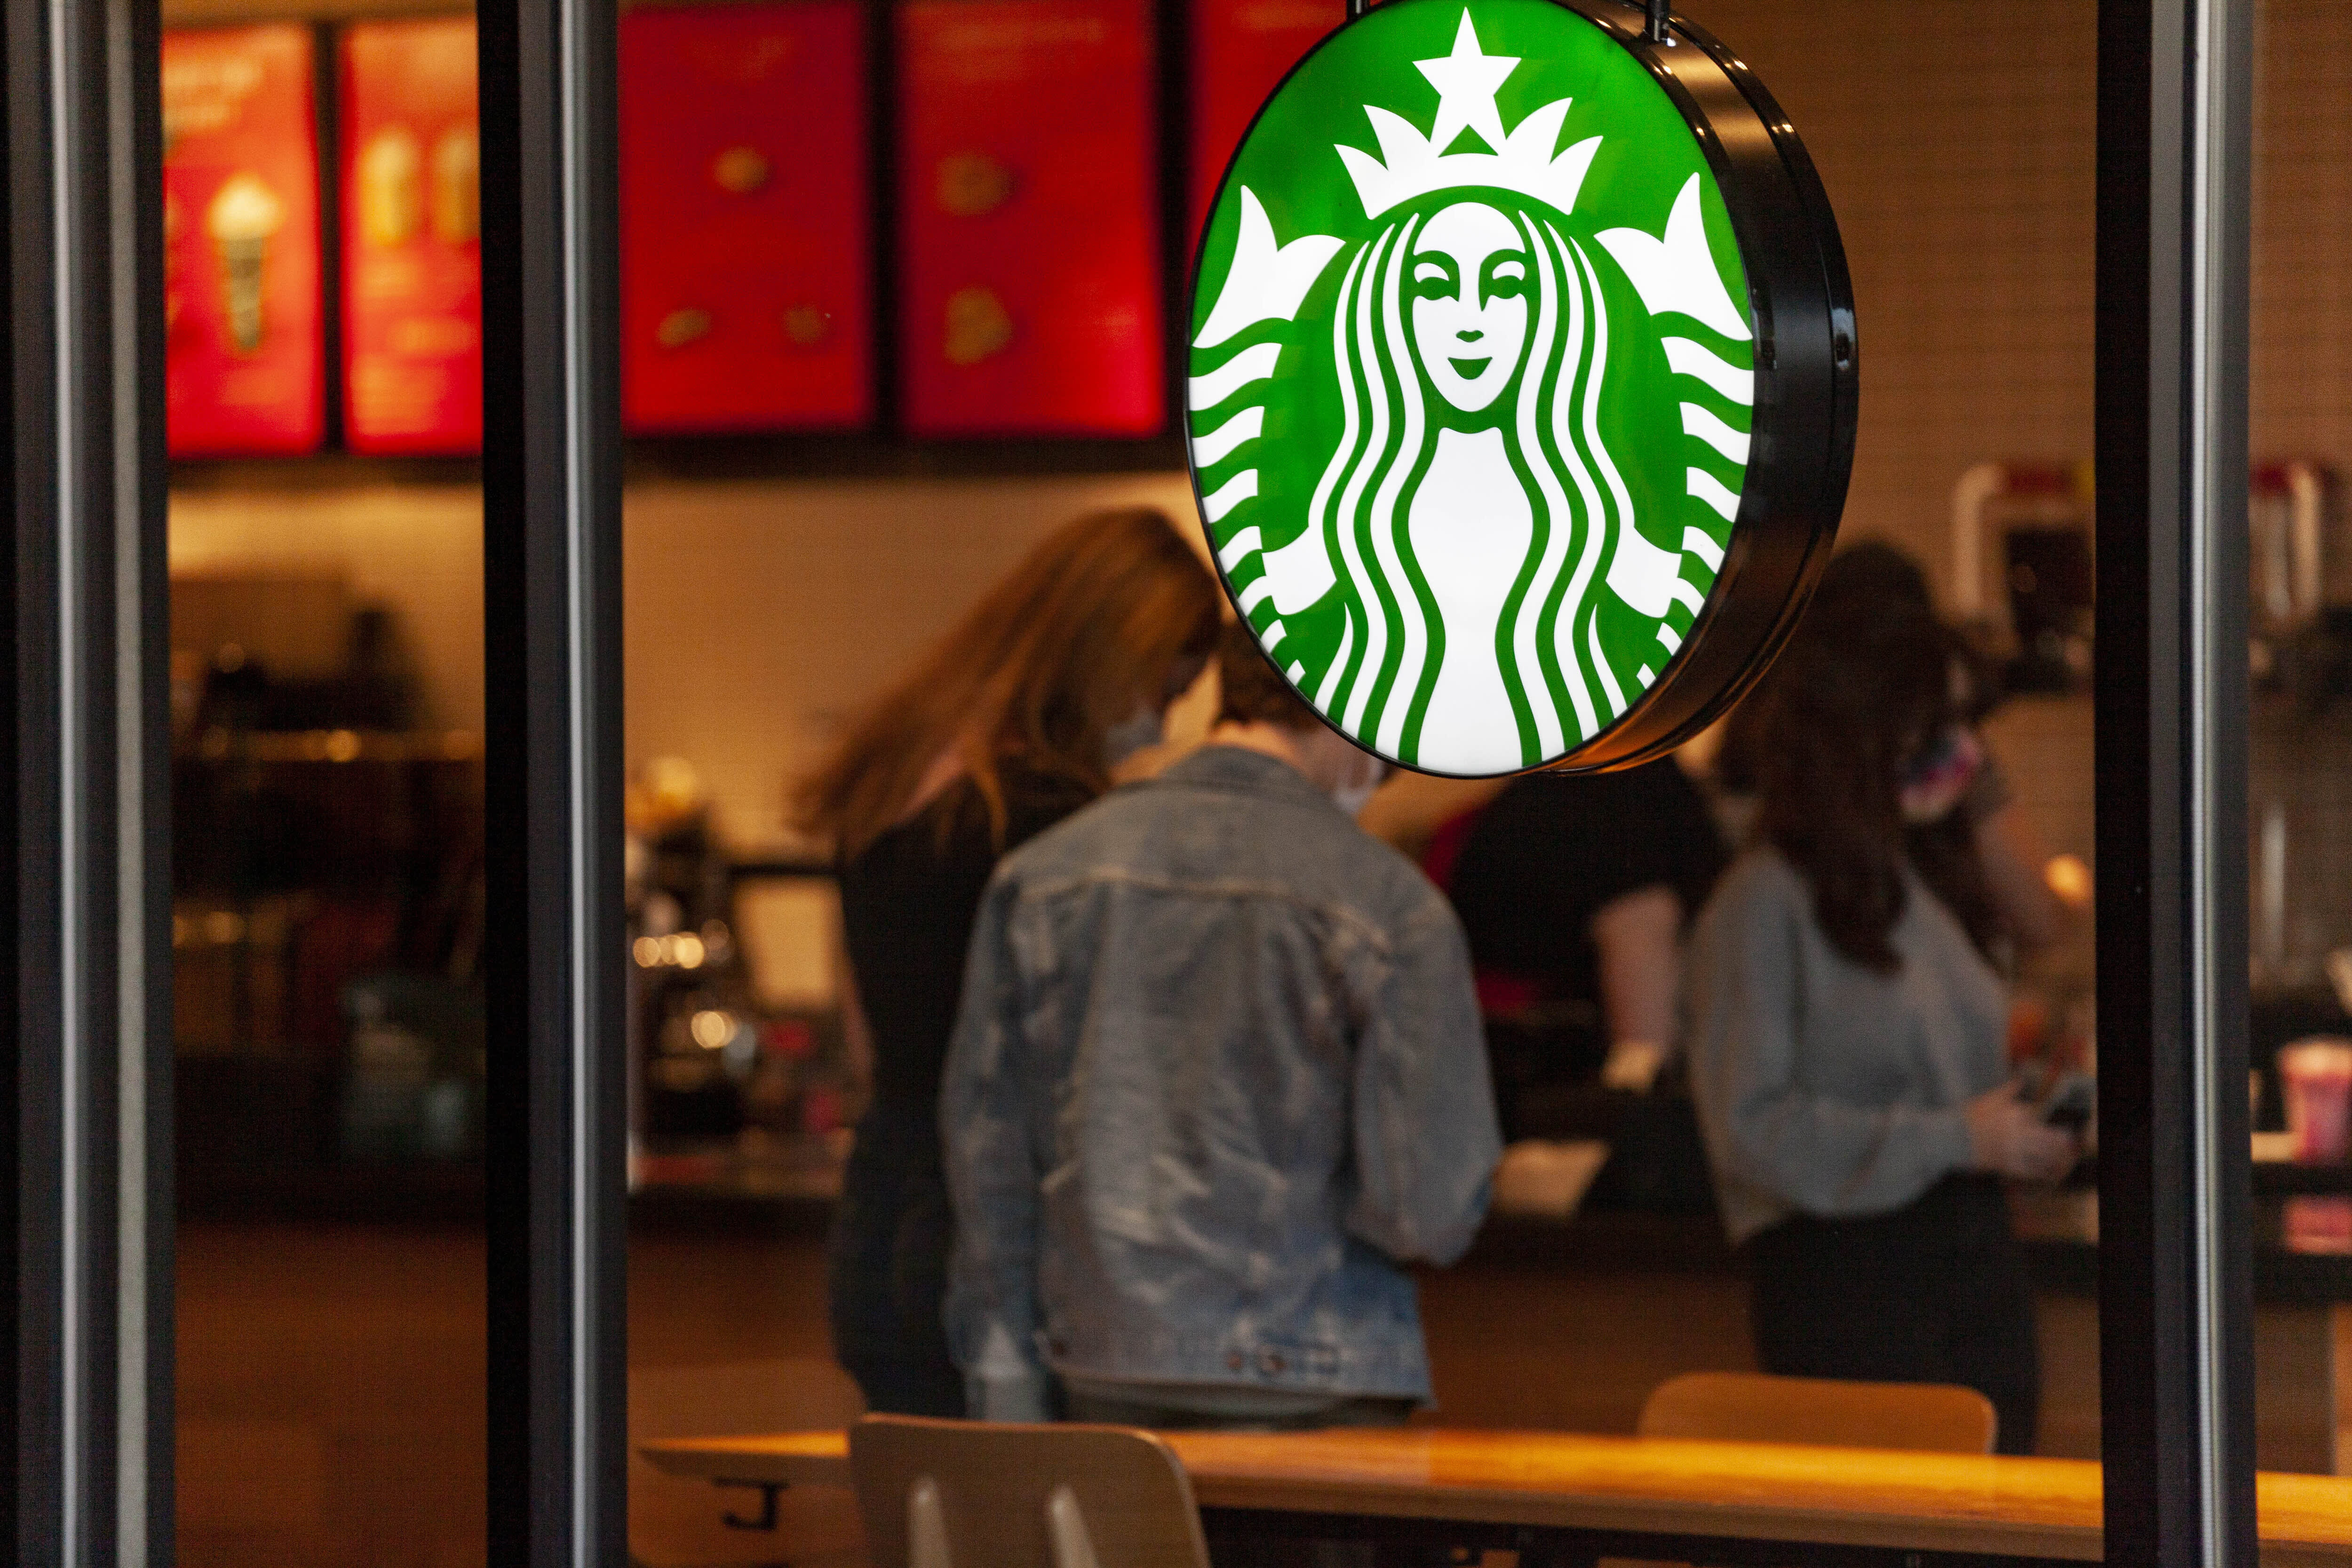 Can You Get A Free Starbucks Drink On Your Birthday In 2022?